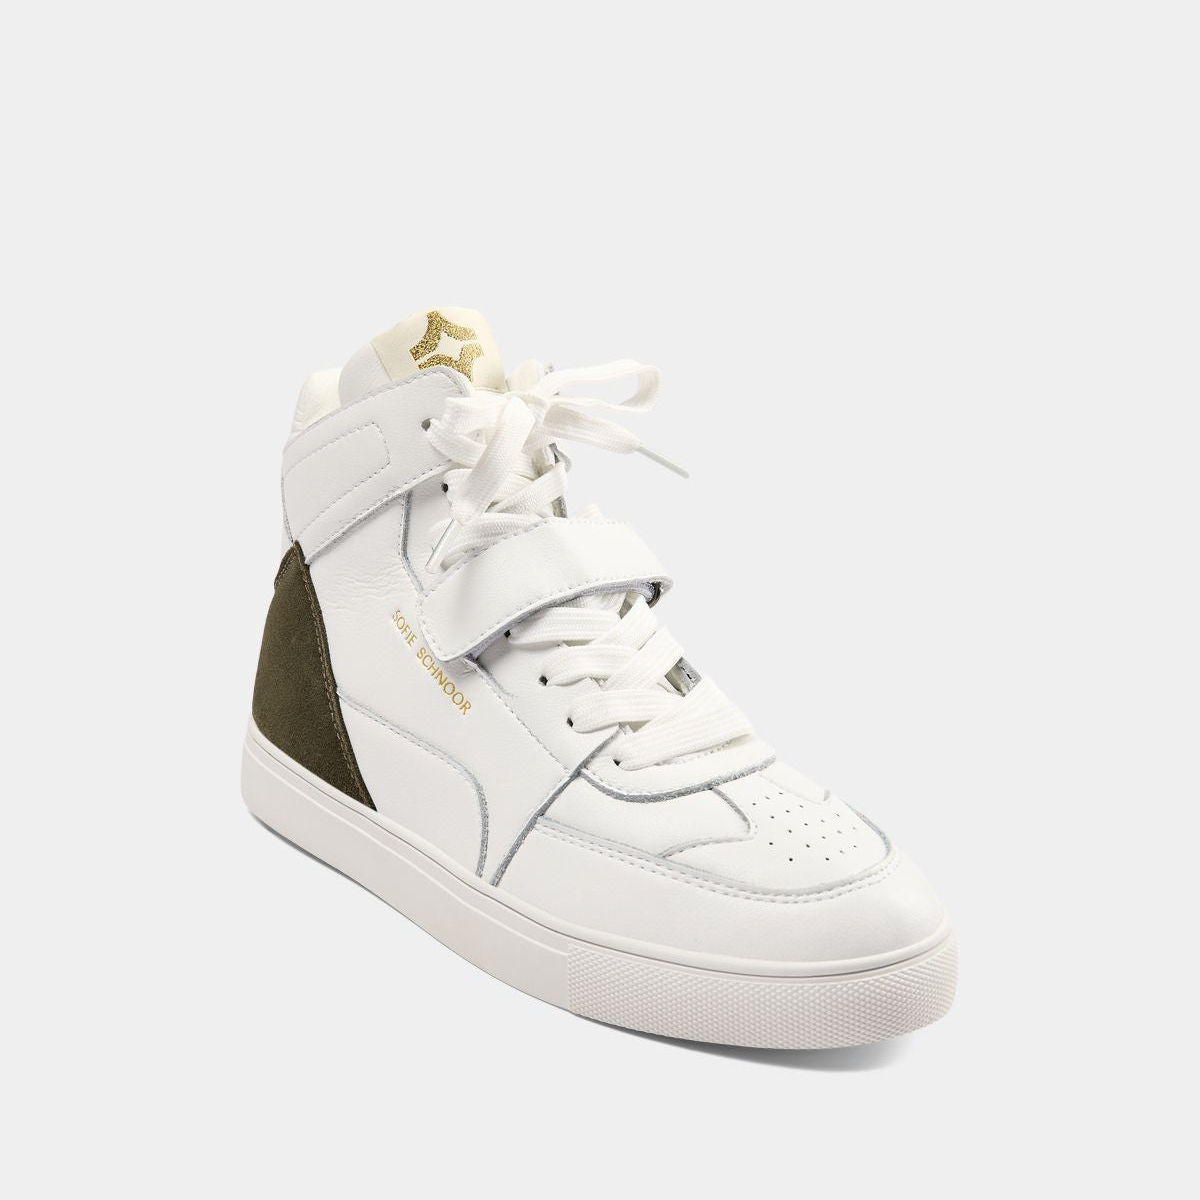 Gotstyle Fashion - Sofie Schnoor Shoes Suede Contrast Hi-Top Sneaker - White